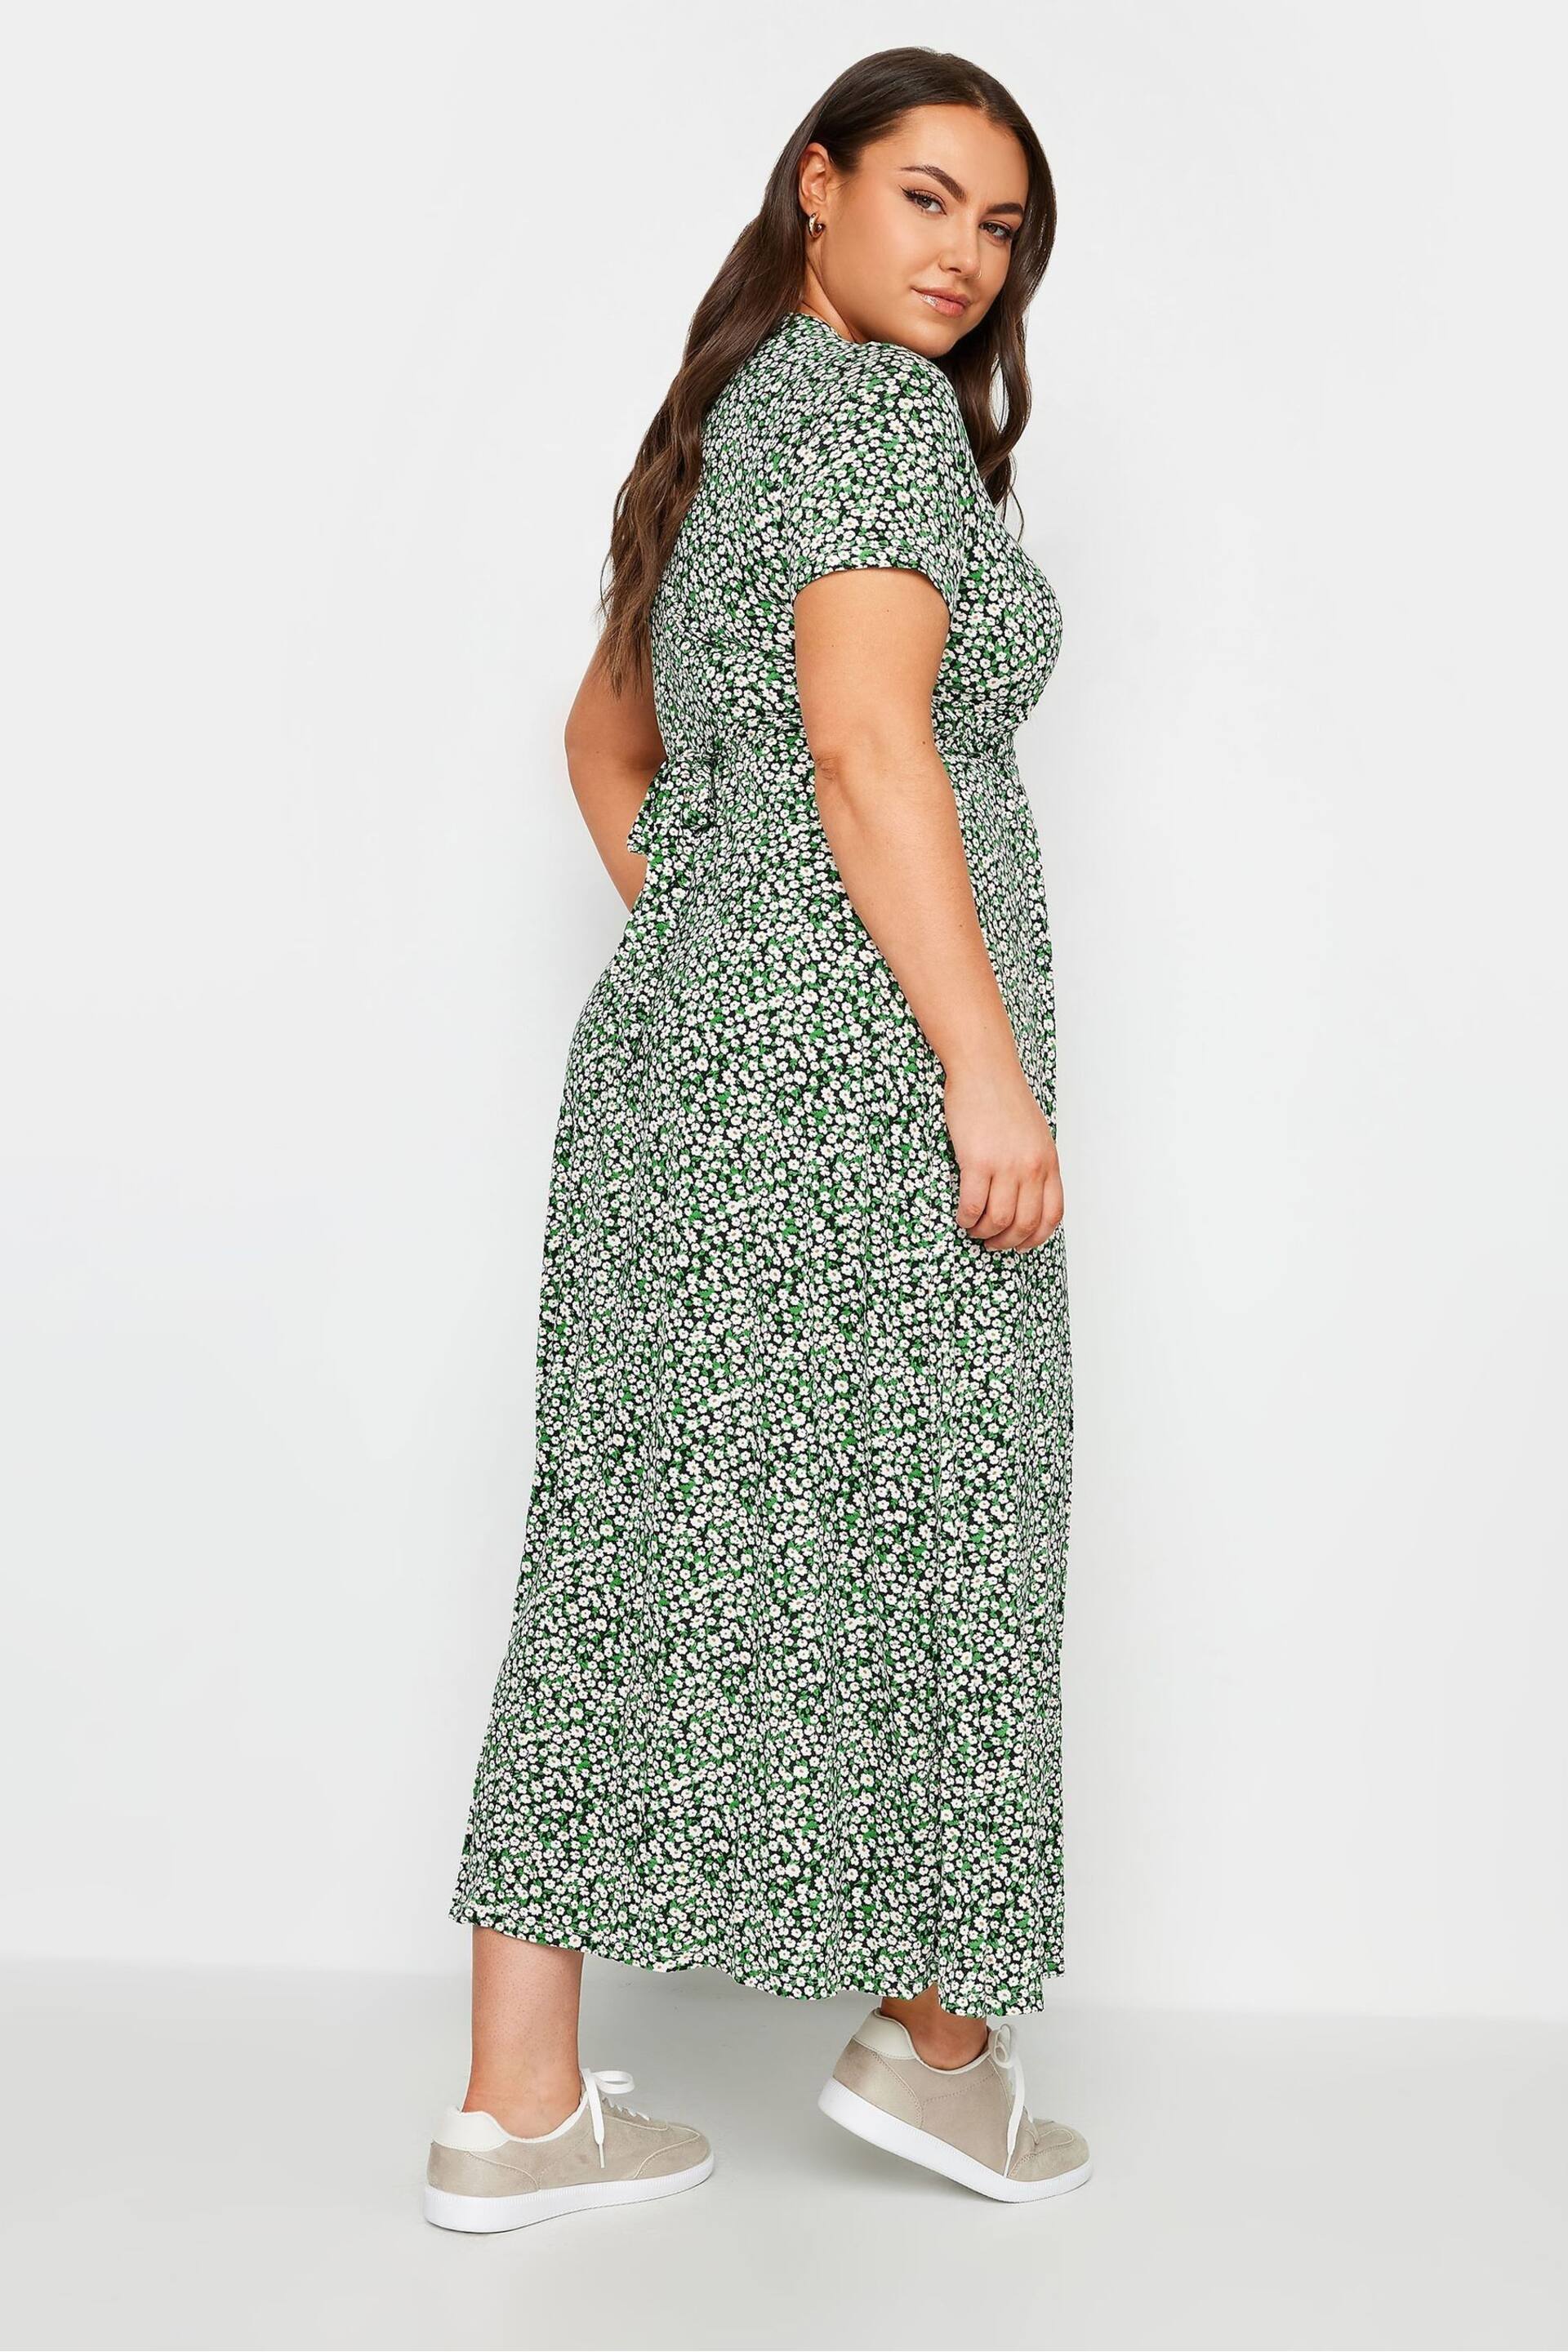 Yours Curve Green Floral Maxi Wrap Dress - Image 2 of 4